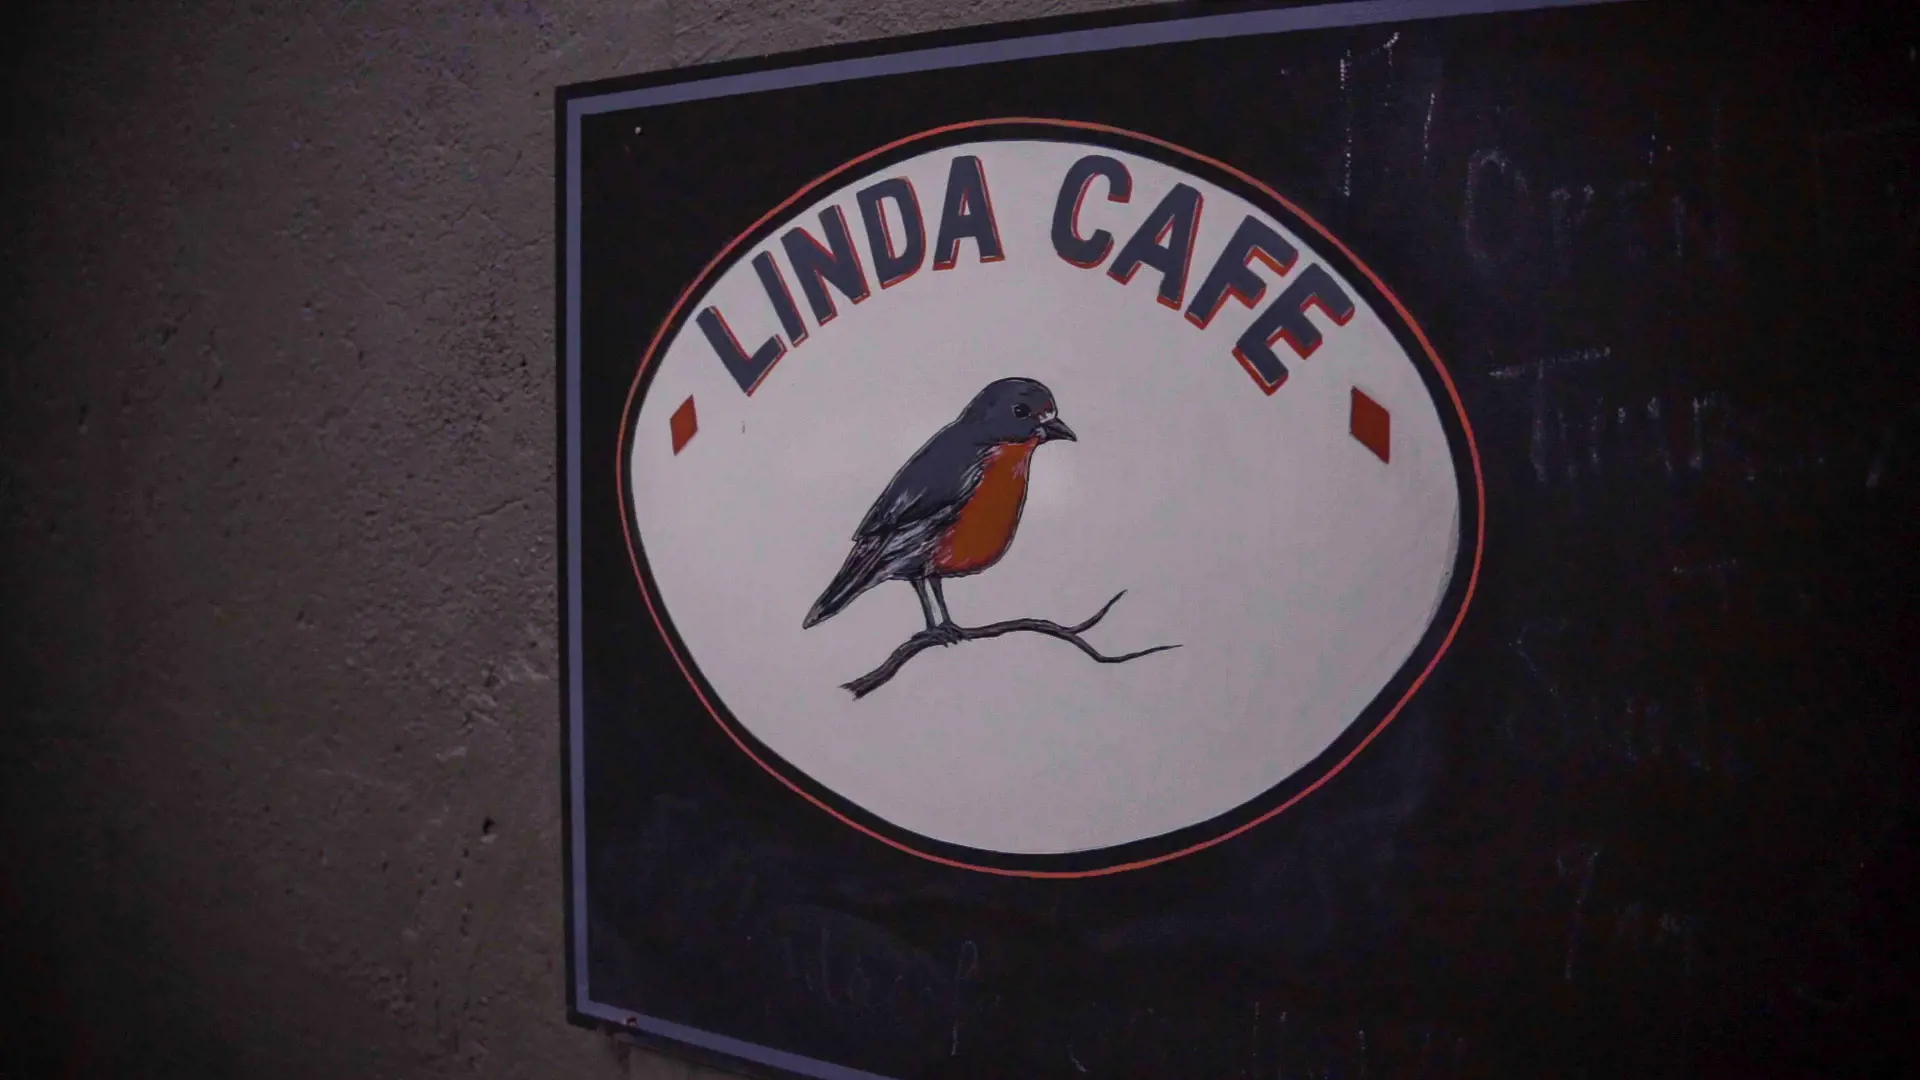 The Linda Cafe signage featuring a small red robin painted on a white oval background.